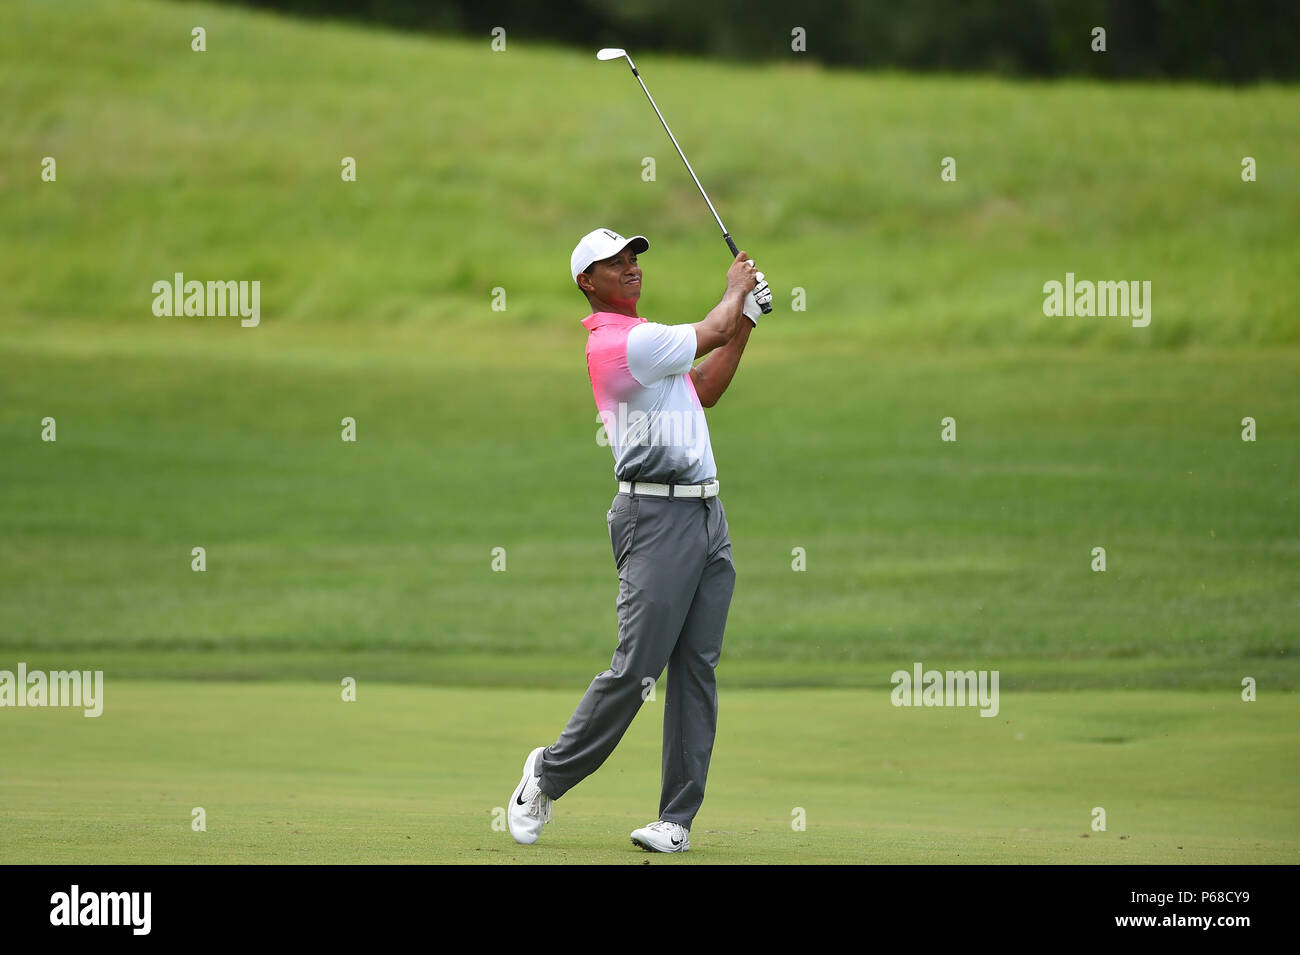 Potomac MD, USA. 28th June, 2018. Tiger Woods (USA) hits his approach shot from the center of the fairway at the second hole during the opening round at the 2018 Quicken Loans National at the Tournament Players Club in Potomac MD. Credit: Cal Sport Media/Alamy Live News Stock Photo